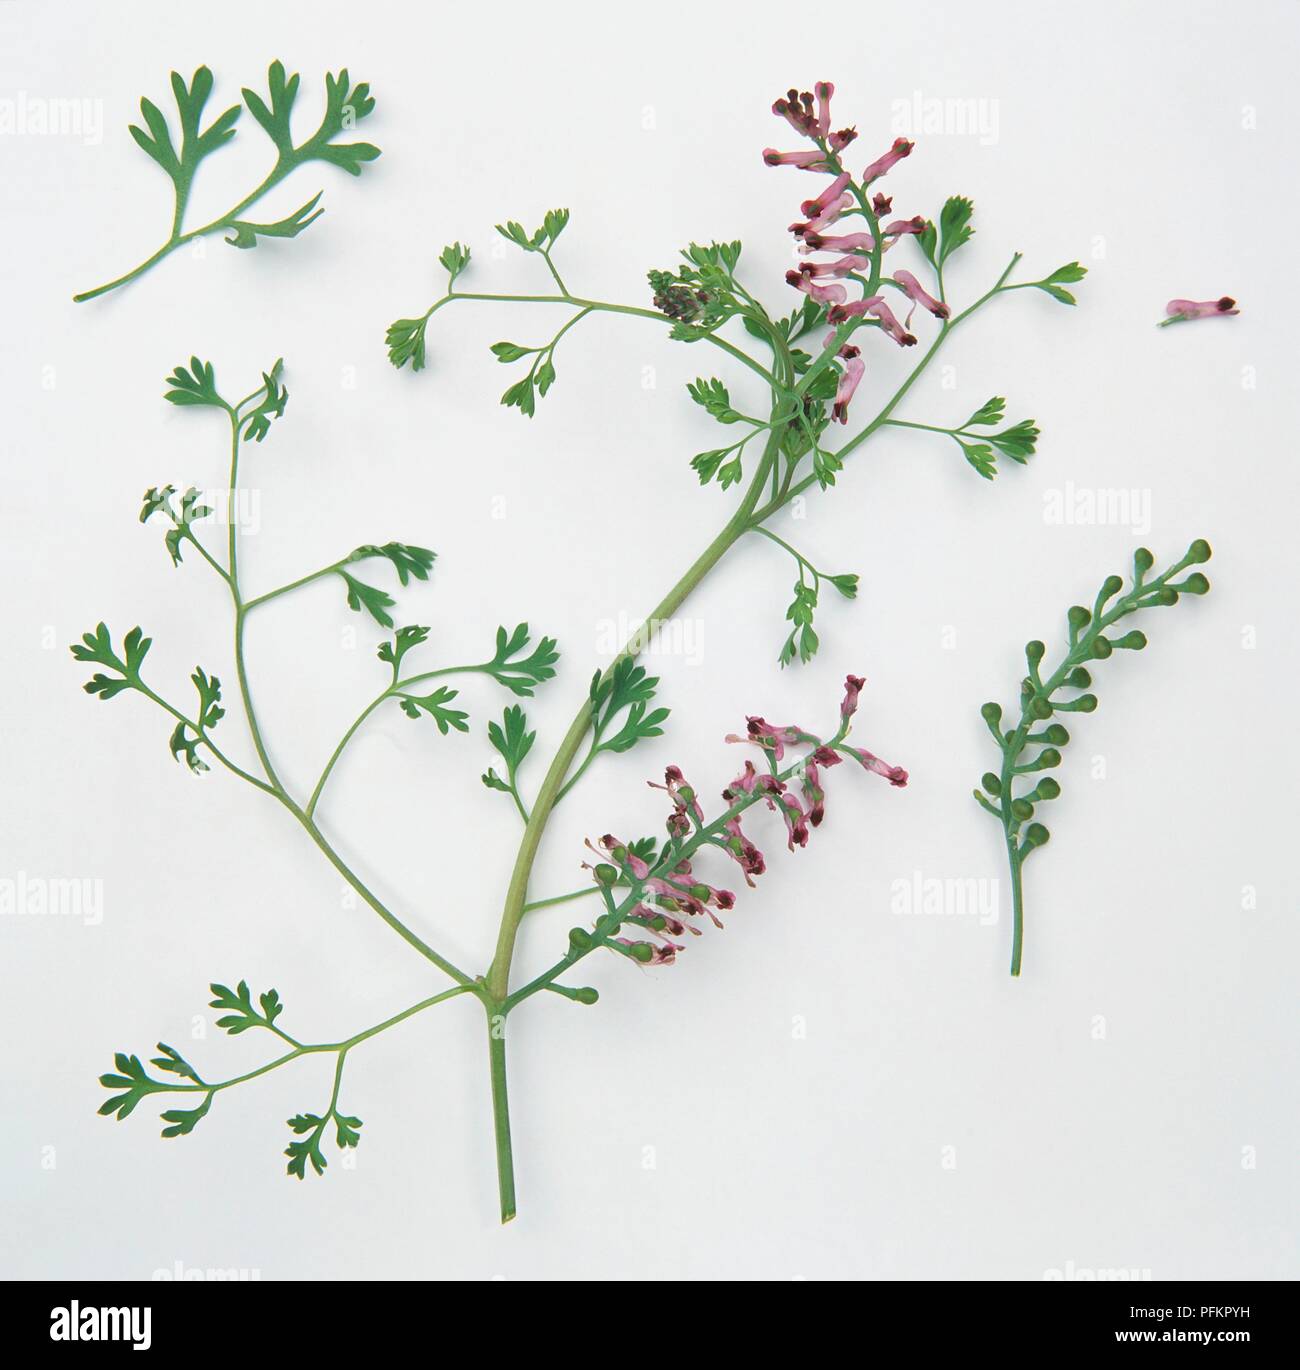 Fumaria officinalis (Fumitory), stems with leaves and pink flowers Stock Photo